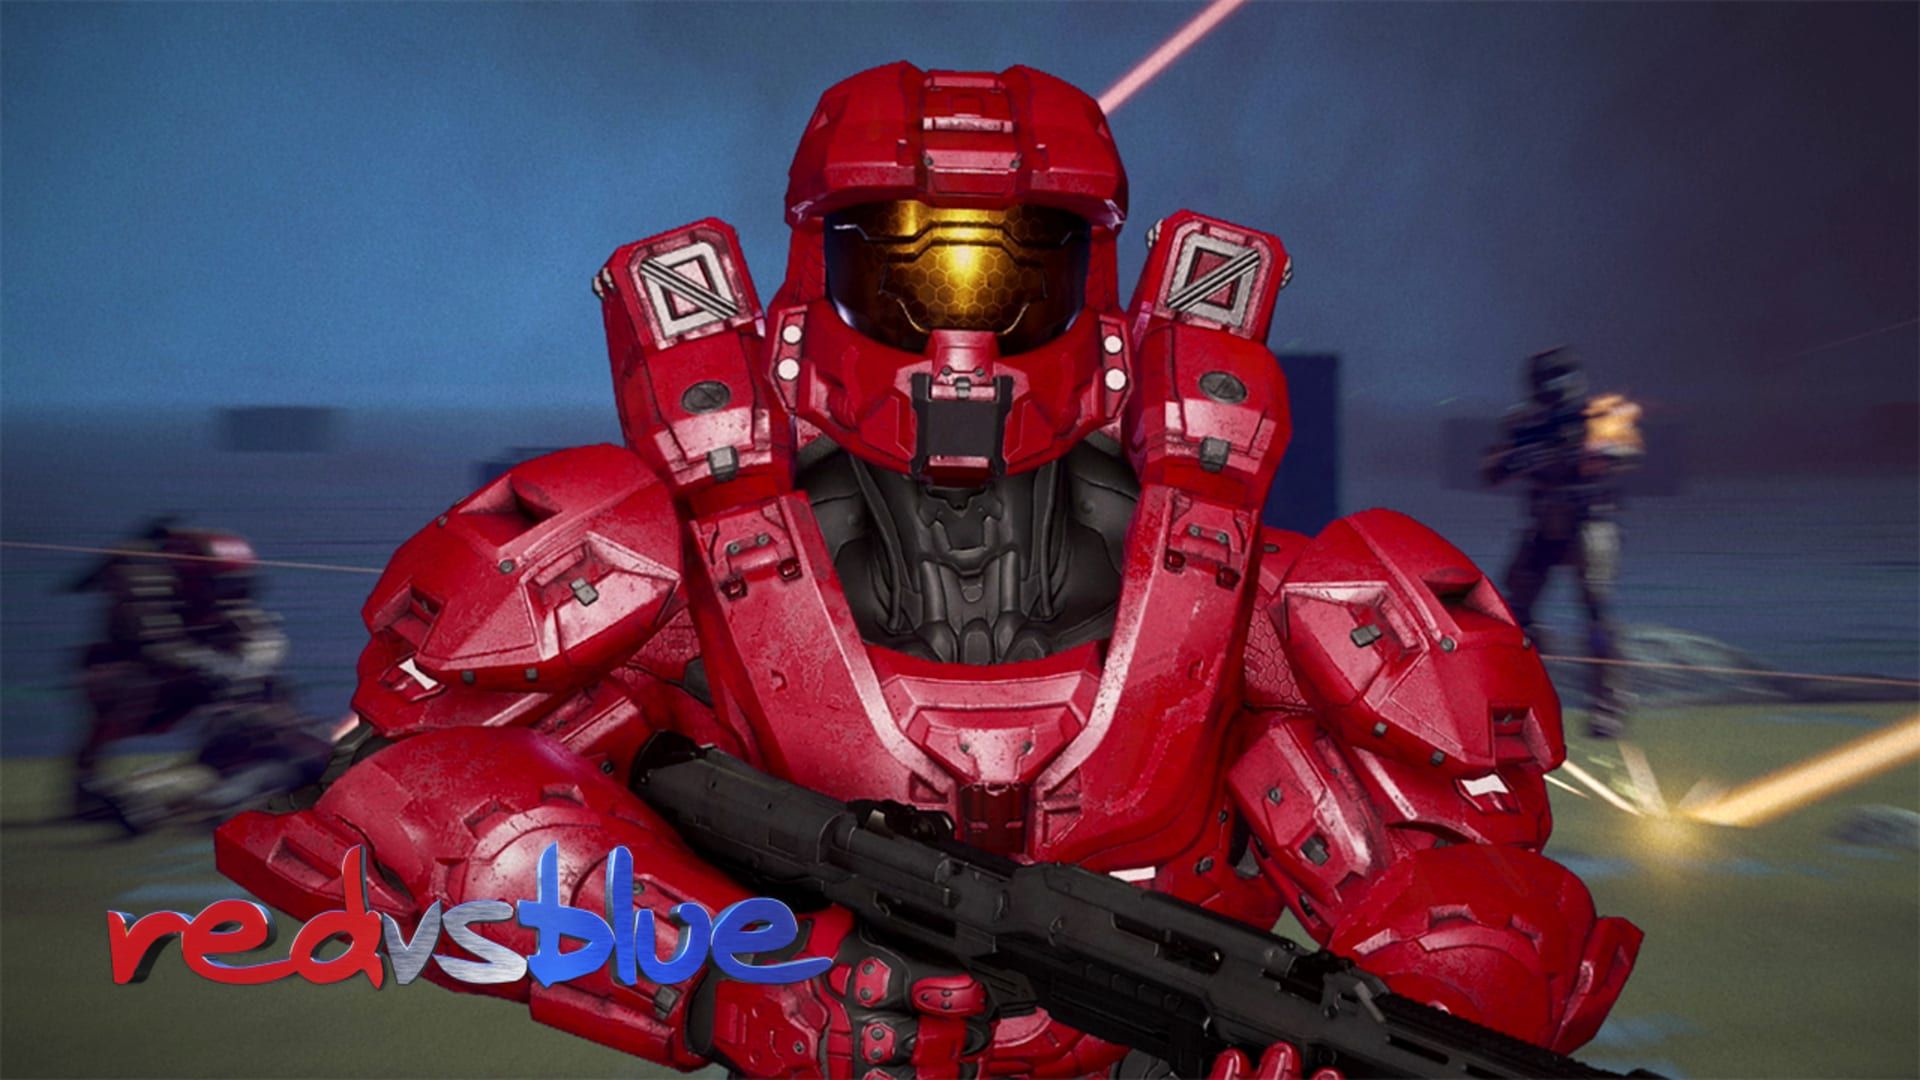 Red vs. Blue background